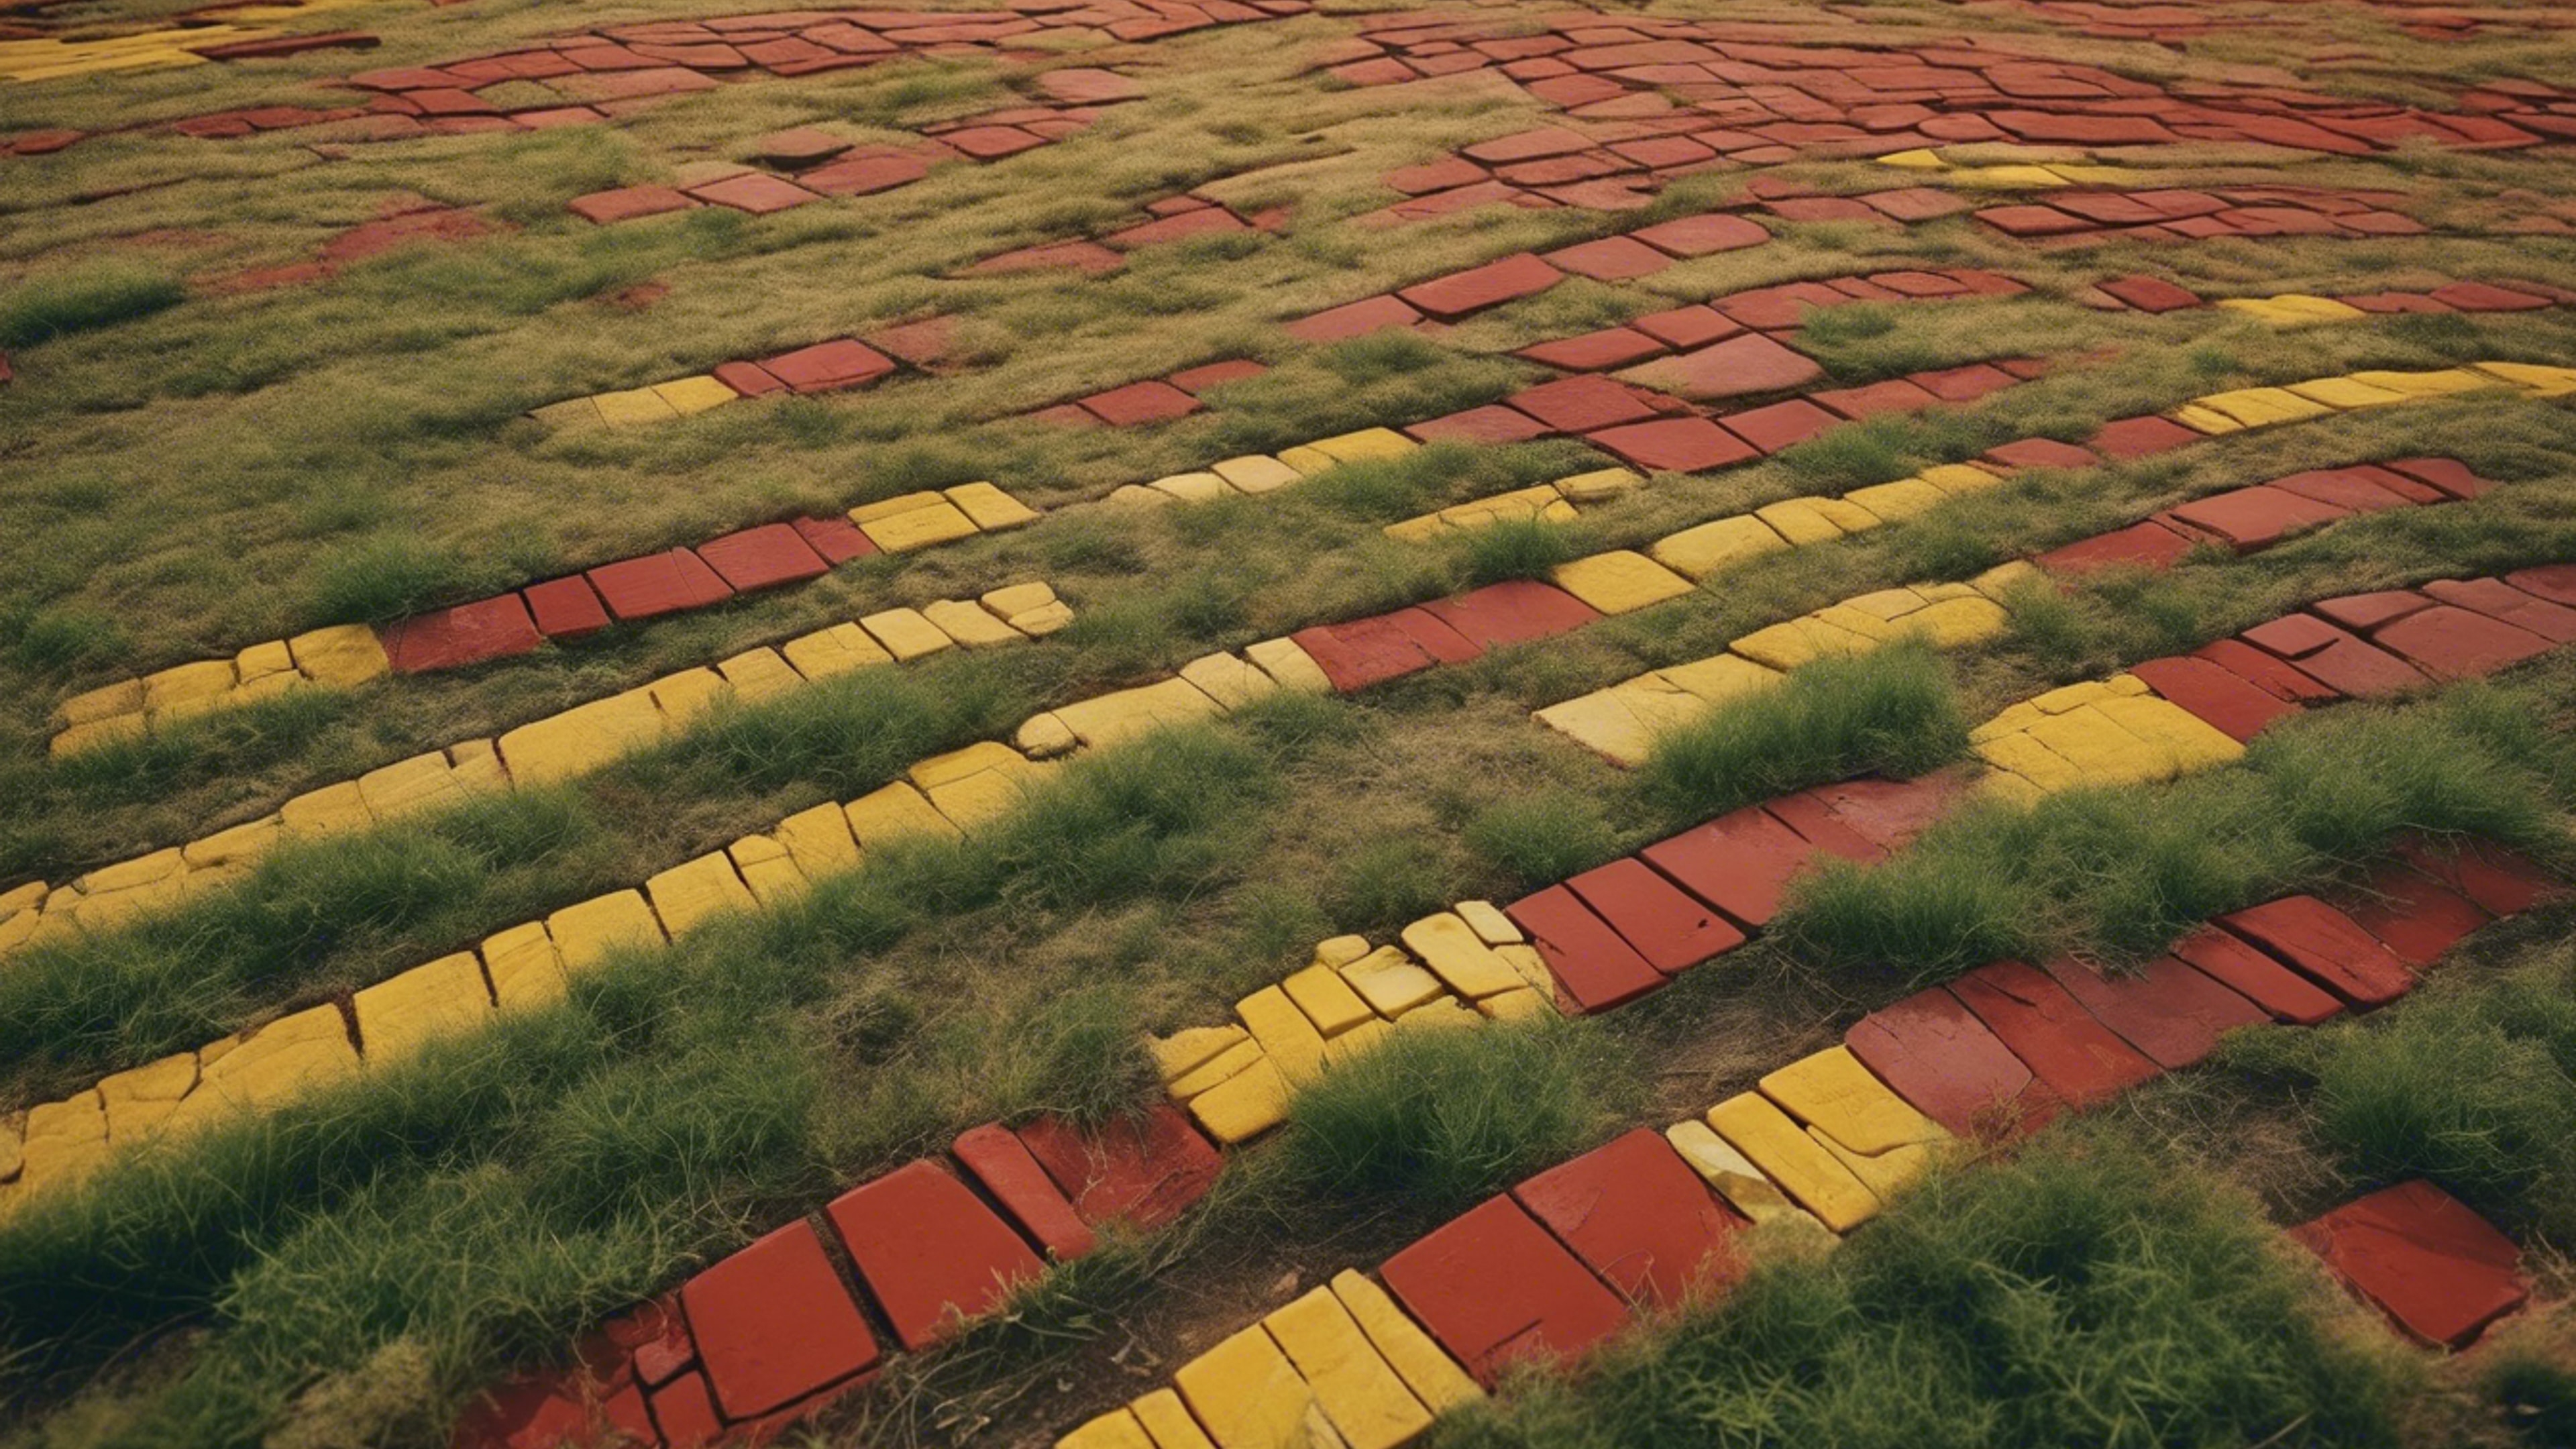 A bird's eye view of a red and yellow brick road weaving through a meadow.壁紙[b665fbc055ed4704af98]